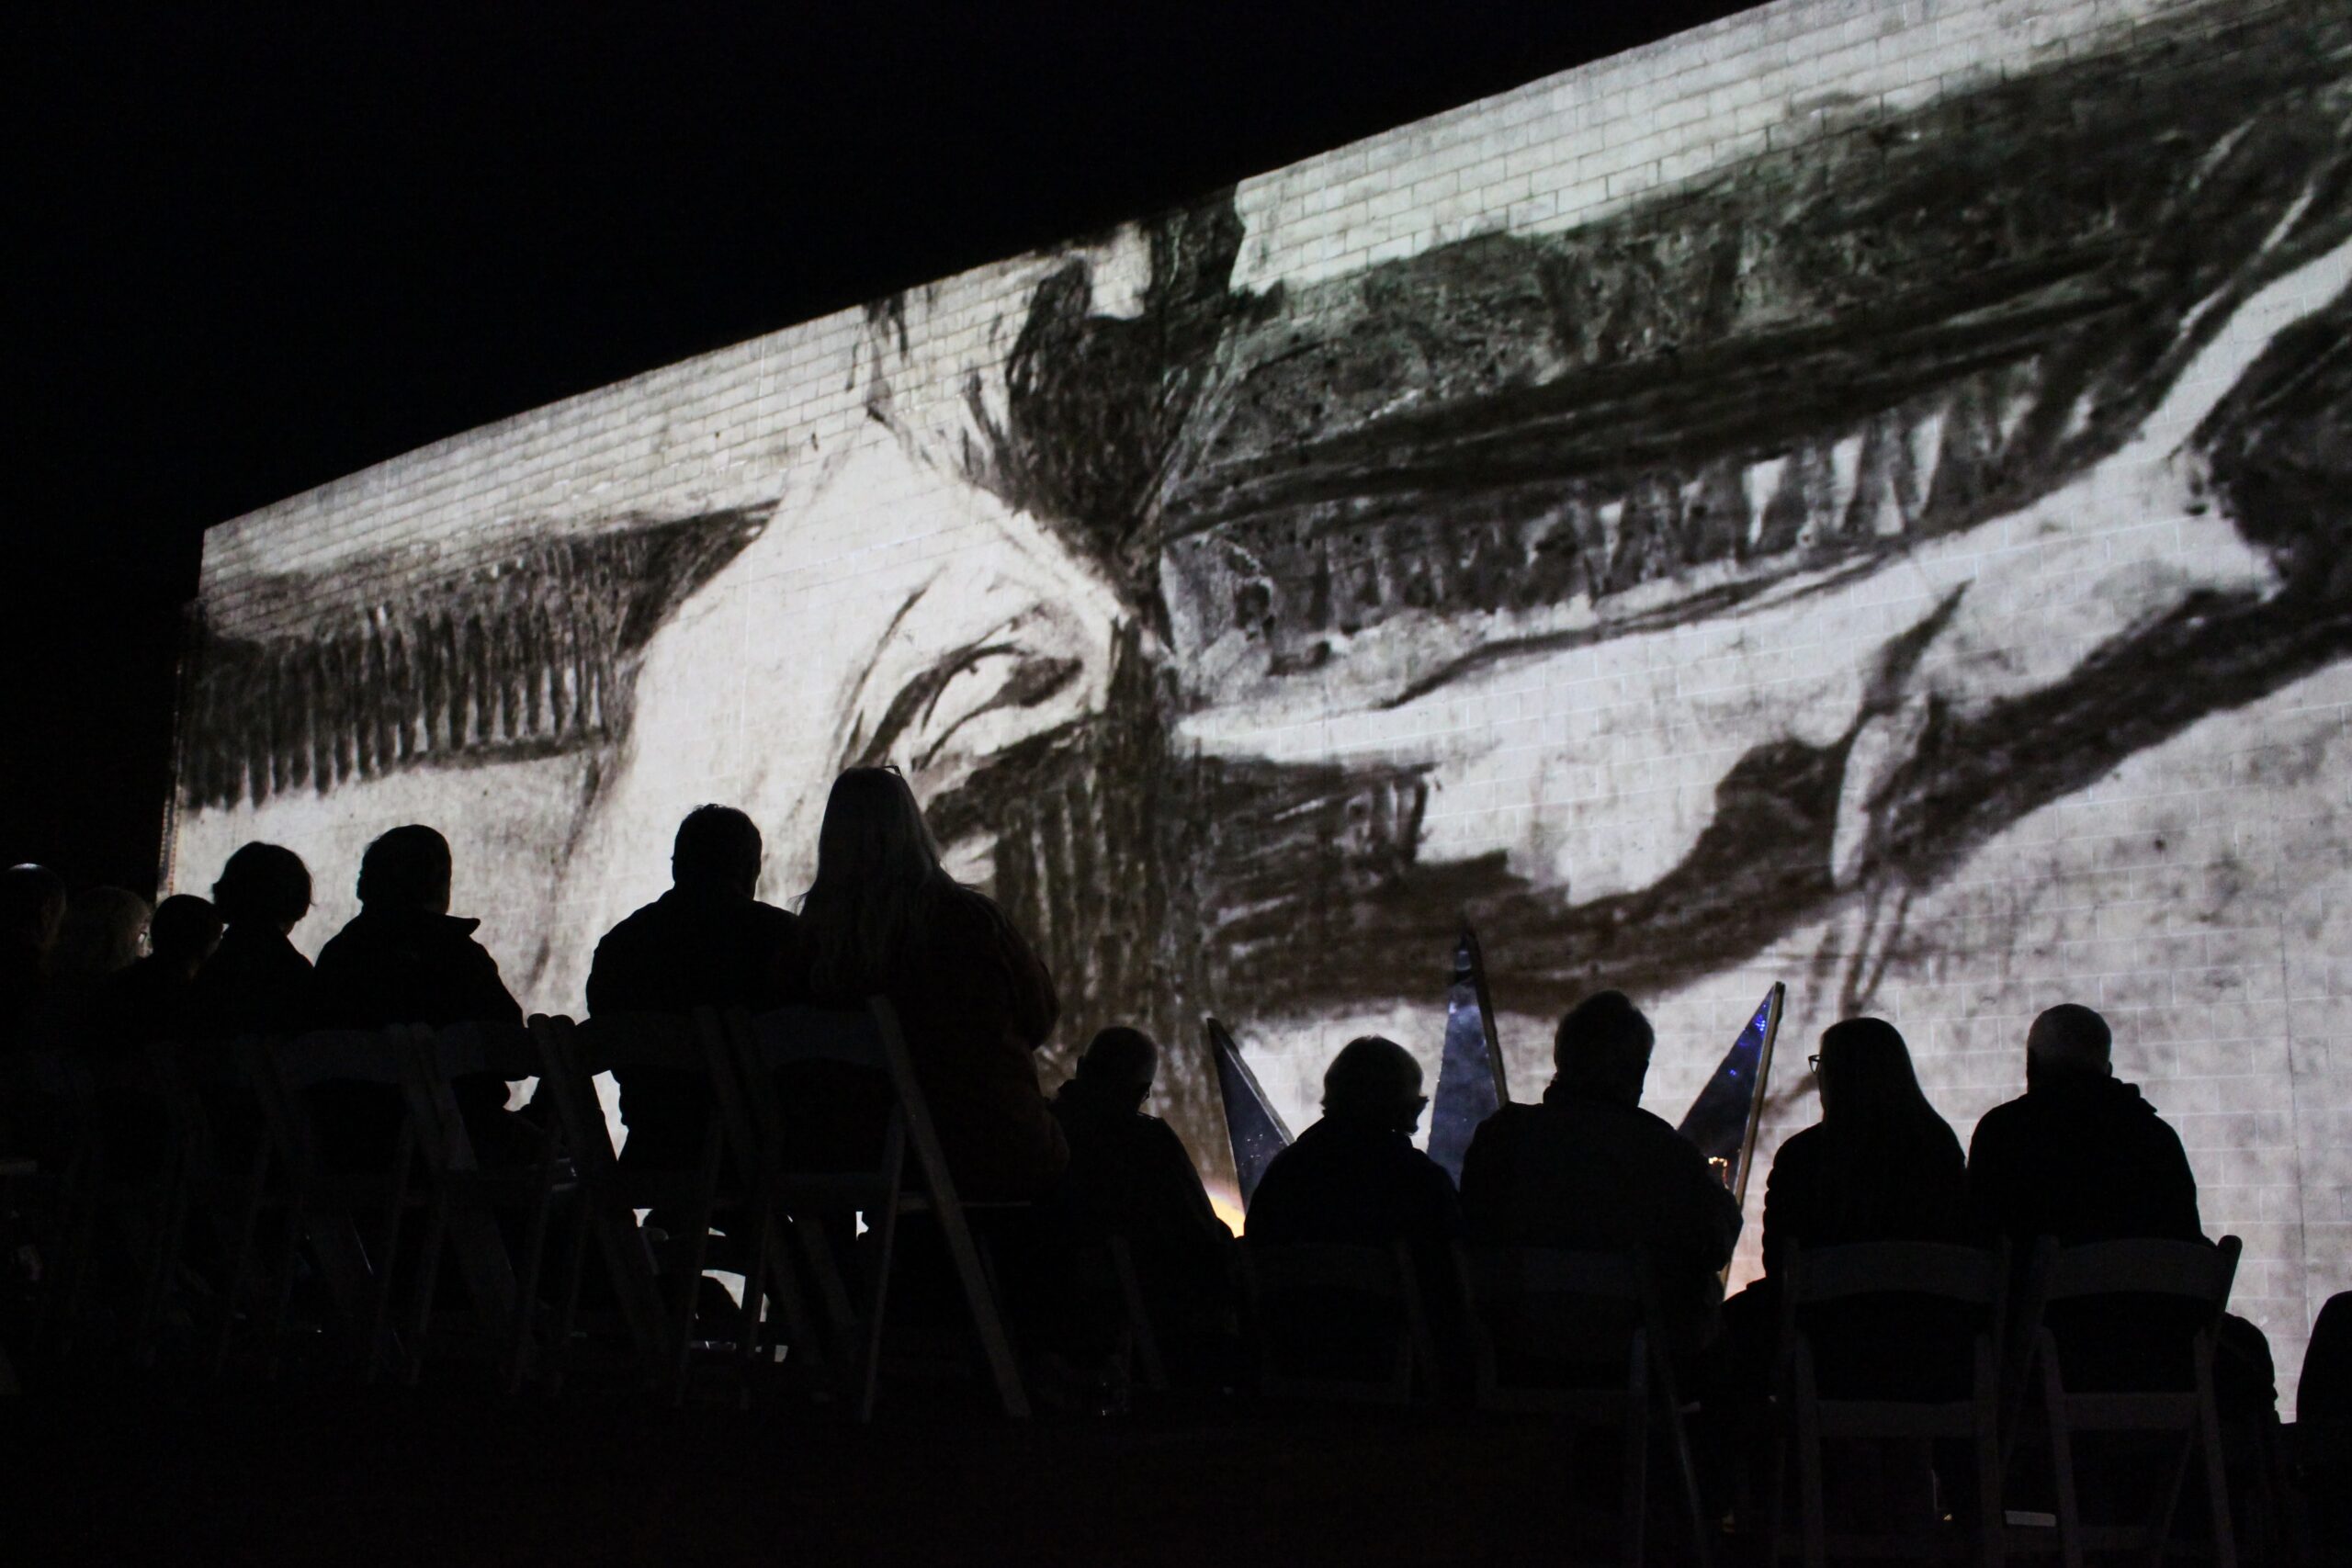 Silhouette of people from behind, seated, watching a black and while image of a worker projected on a wall